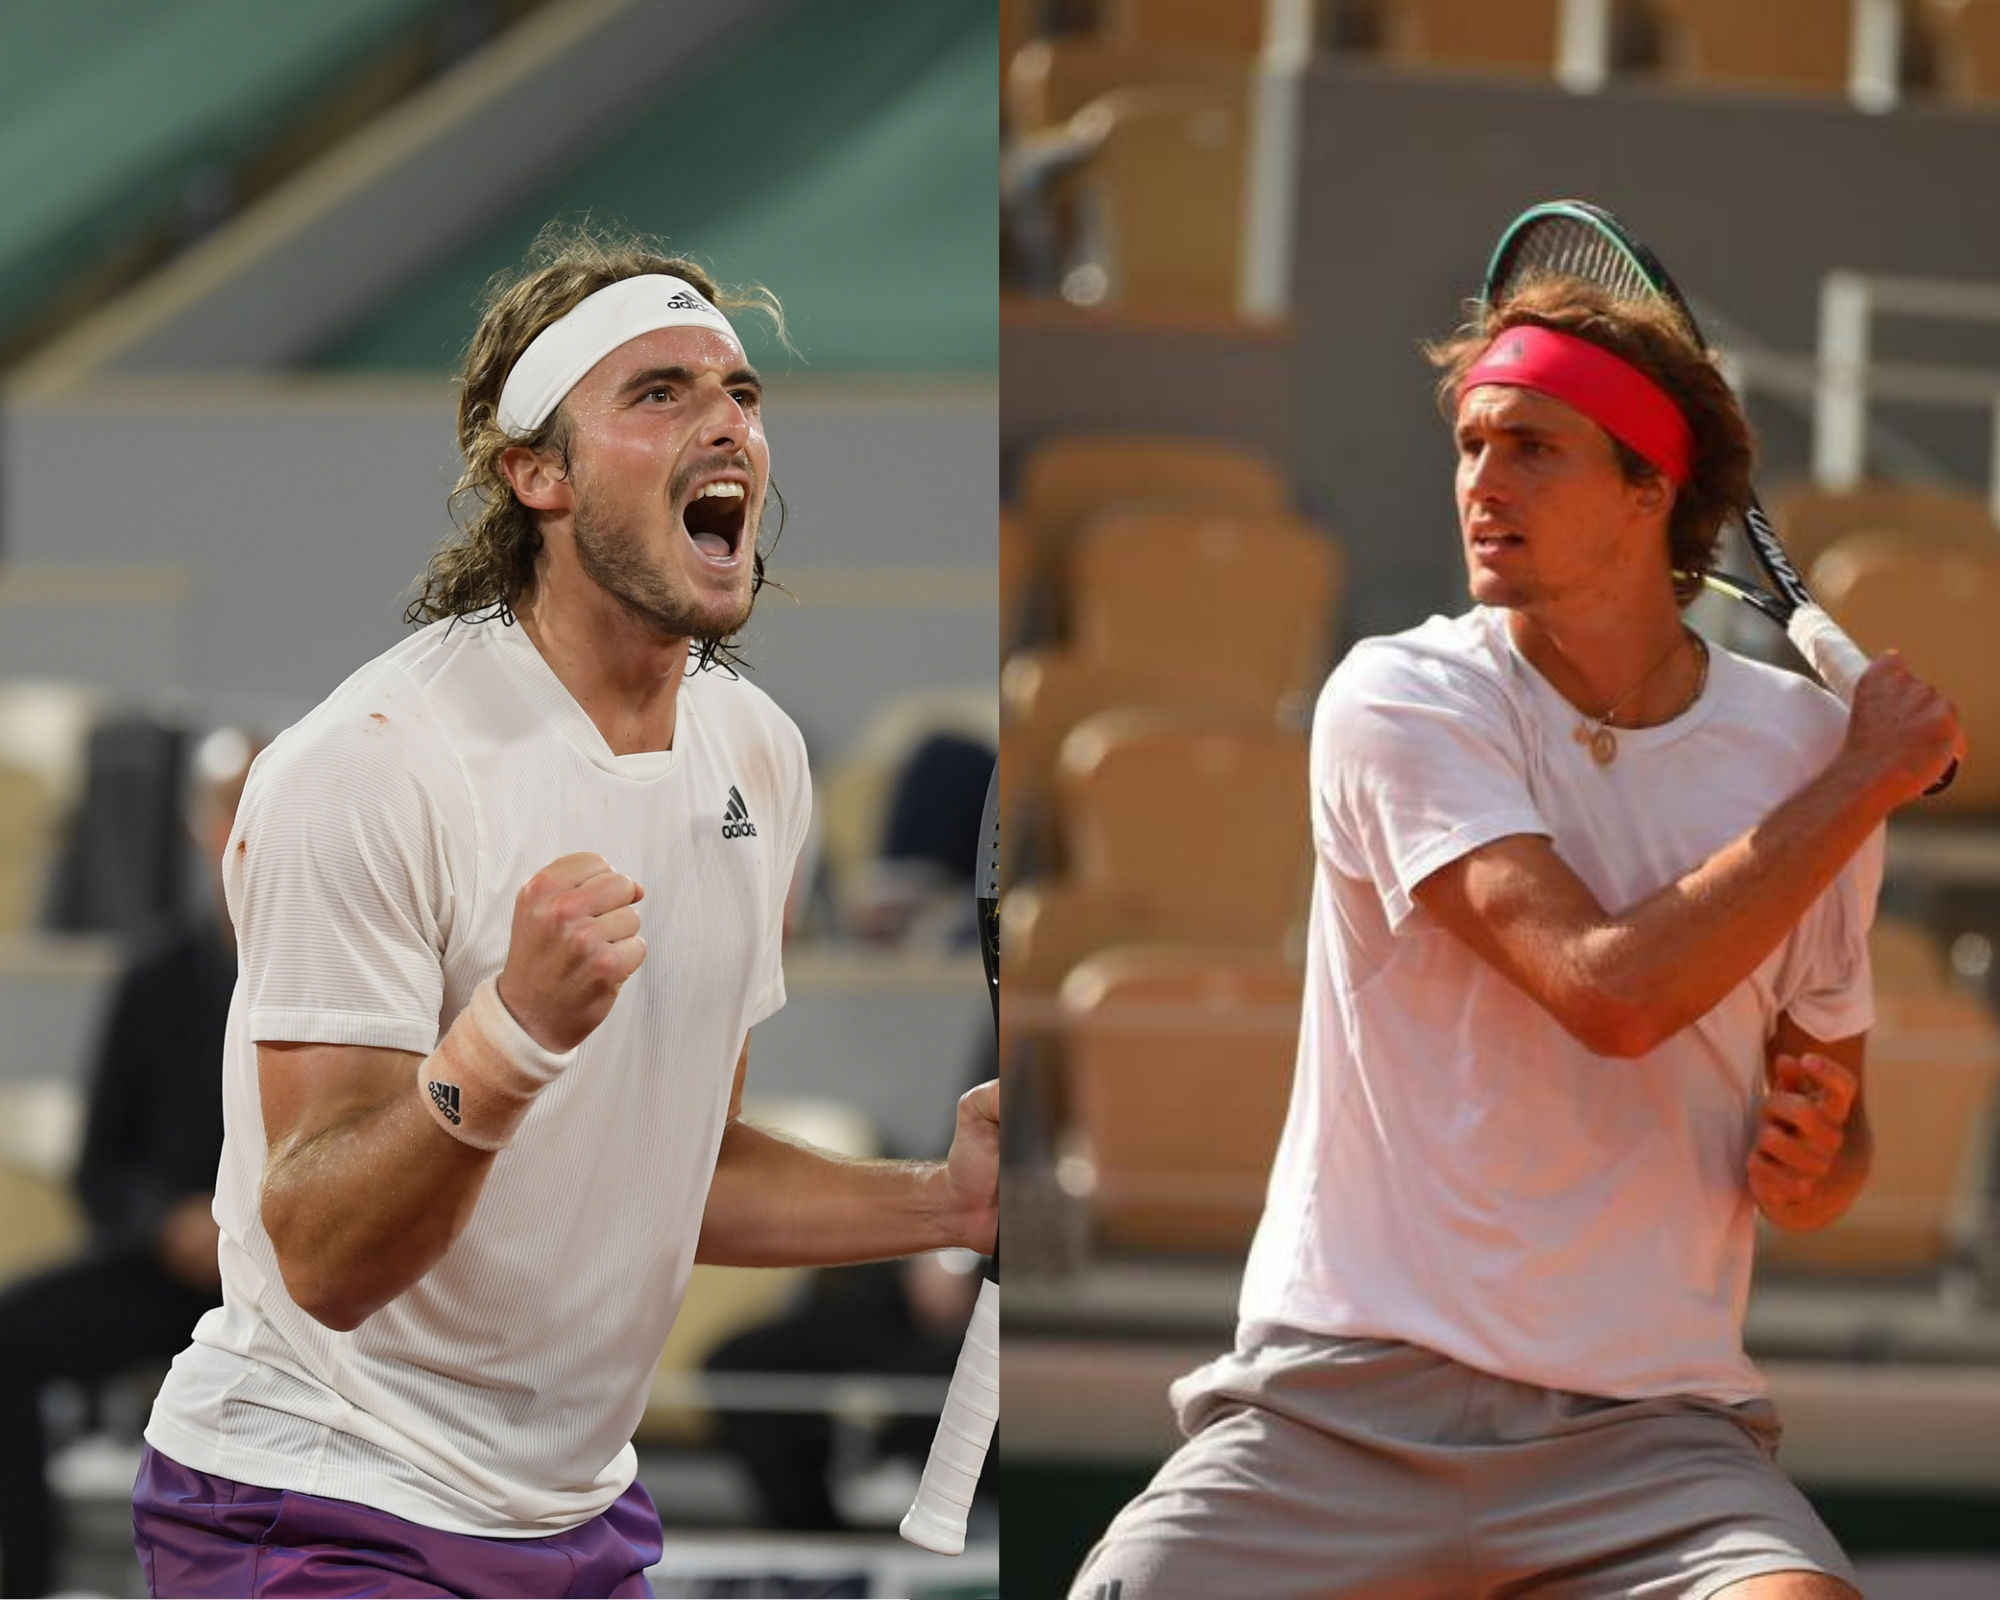 French%20Open%20semifinal%20Alexander%20Zverev%20versus%20Stefanos%20Tsitsipas%3A%20When%20and%20where%20to%20watch